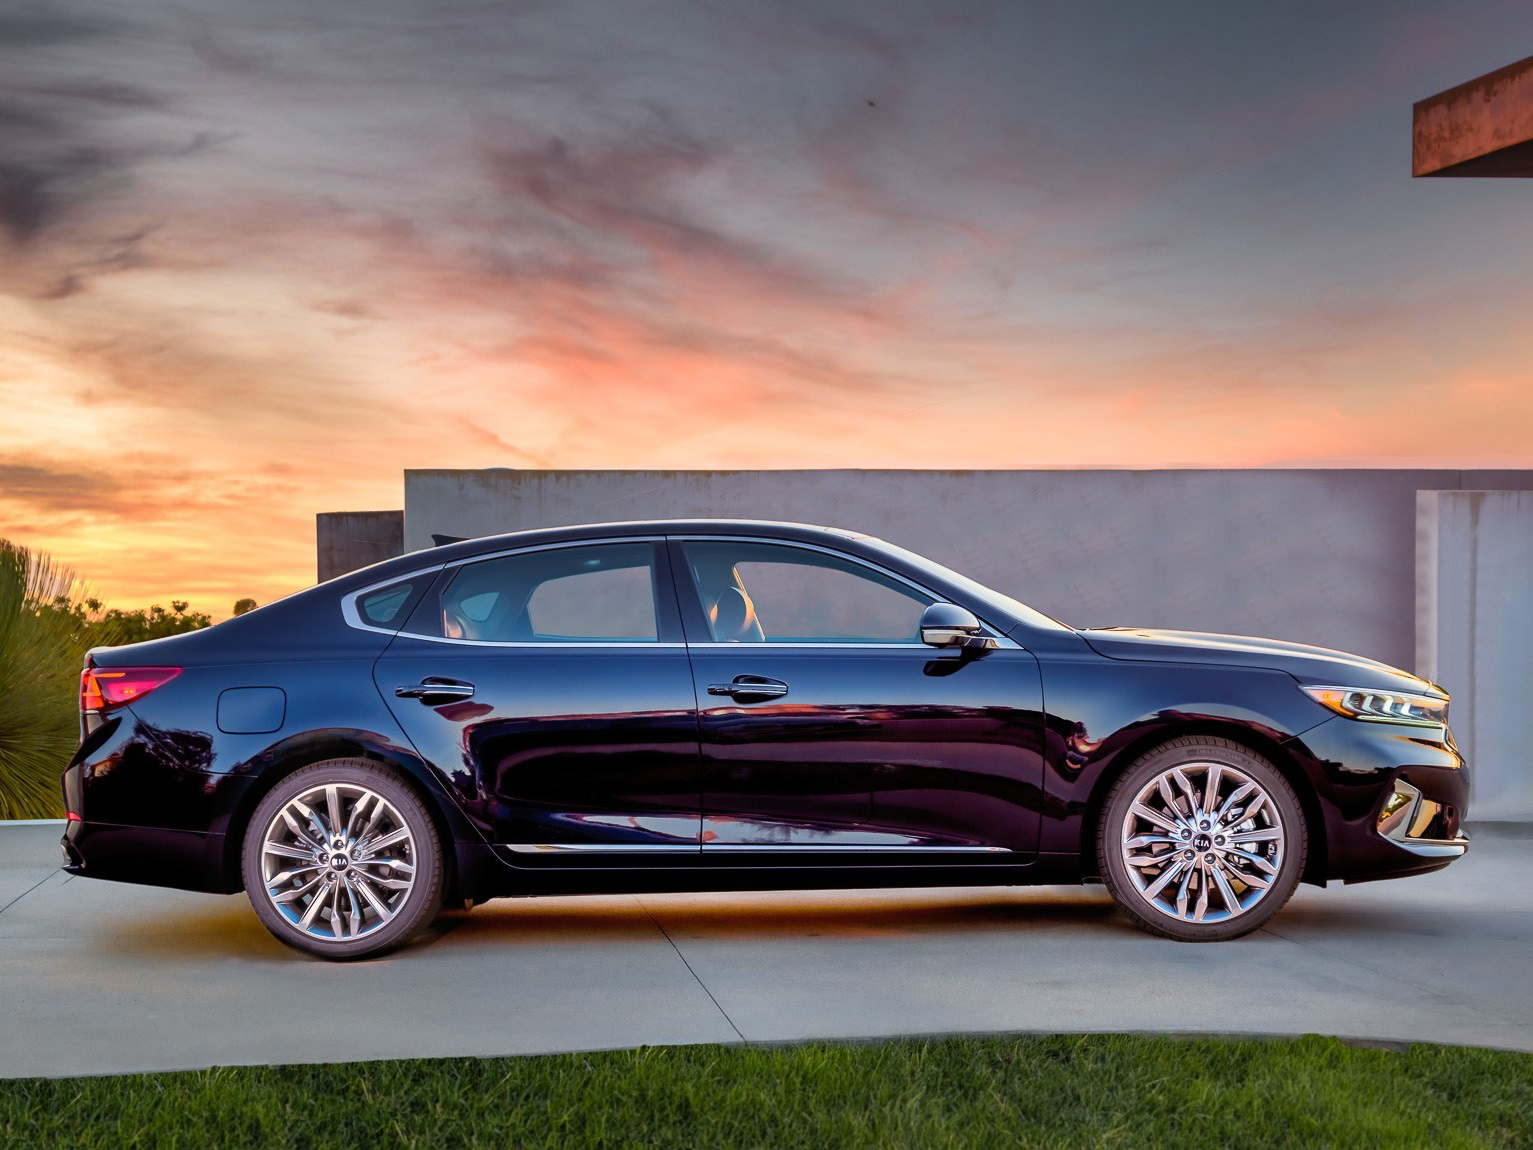 Kia has refreshed the Cadenza for the 2020 model year. It will arrive at dealerships soon.